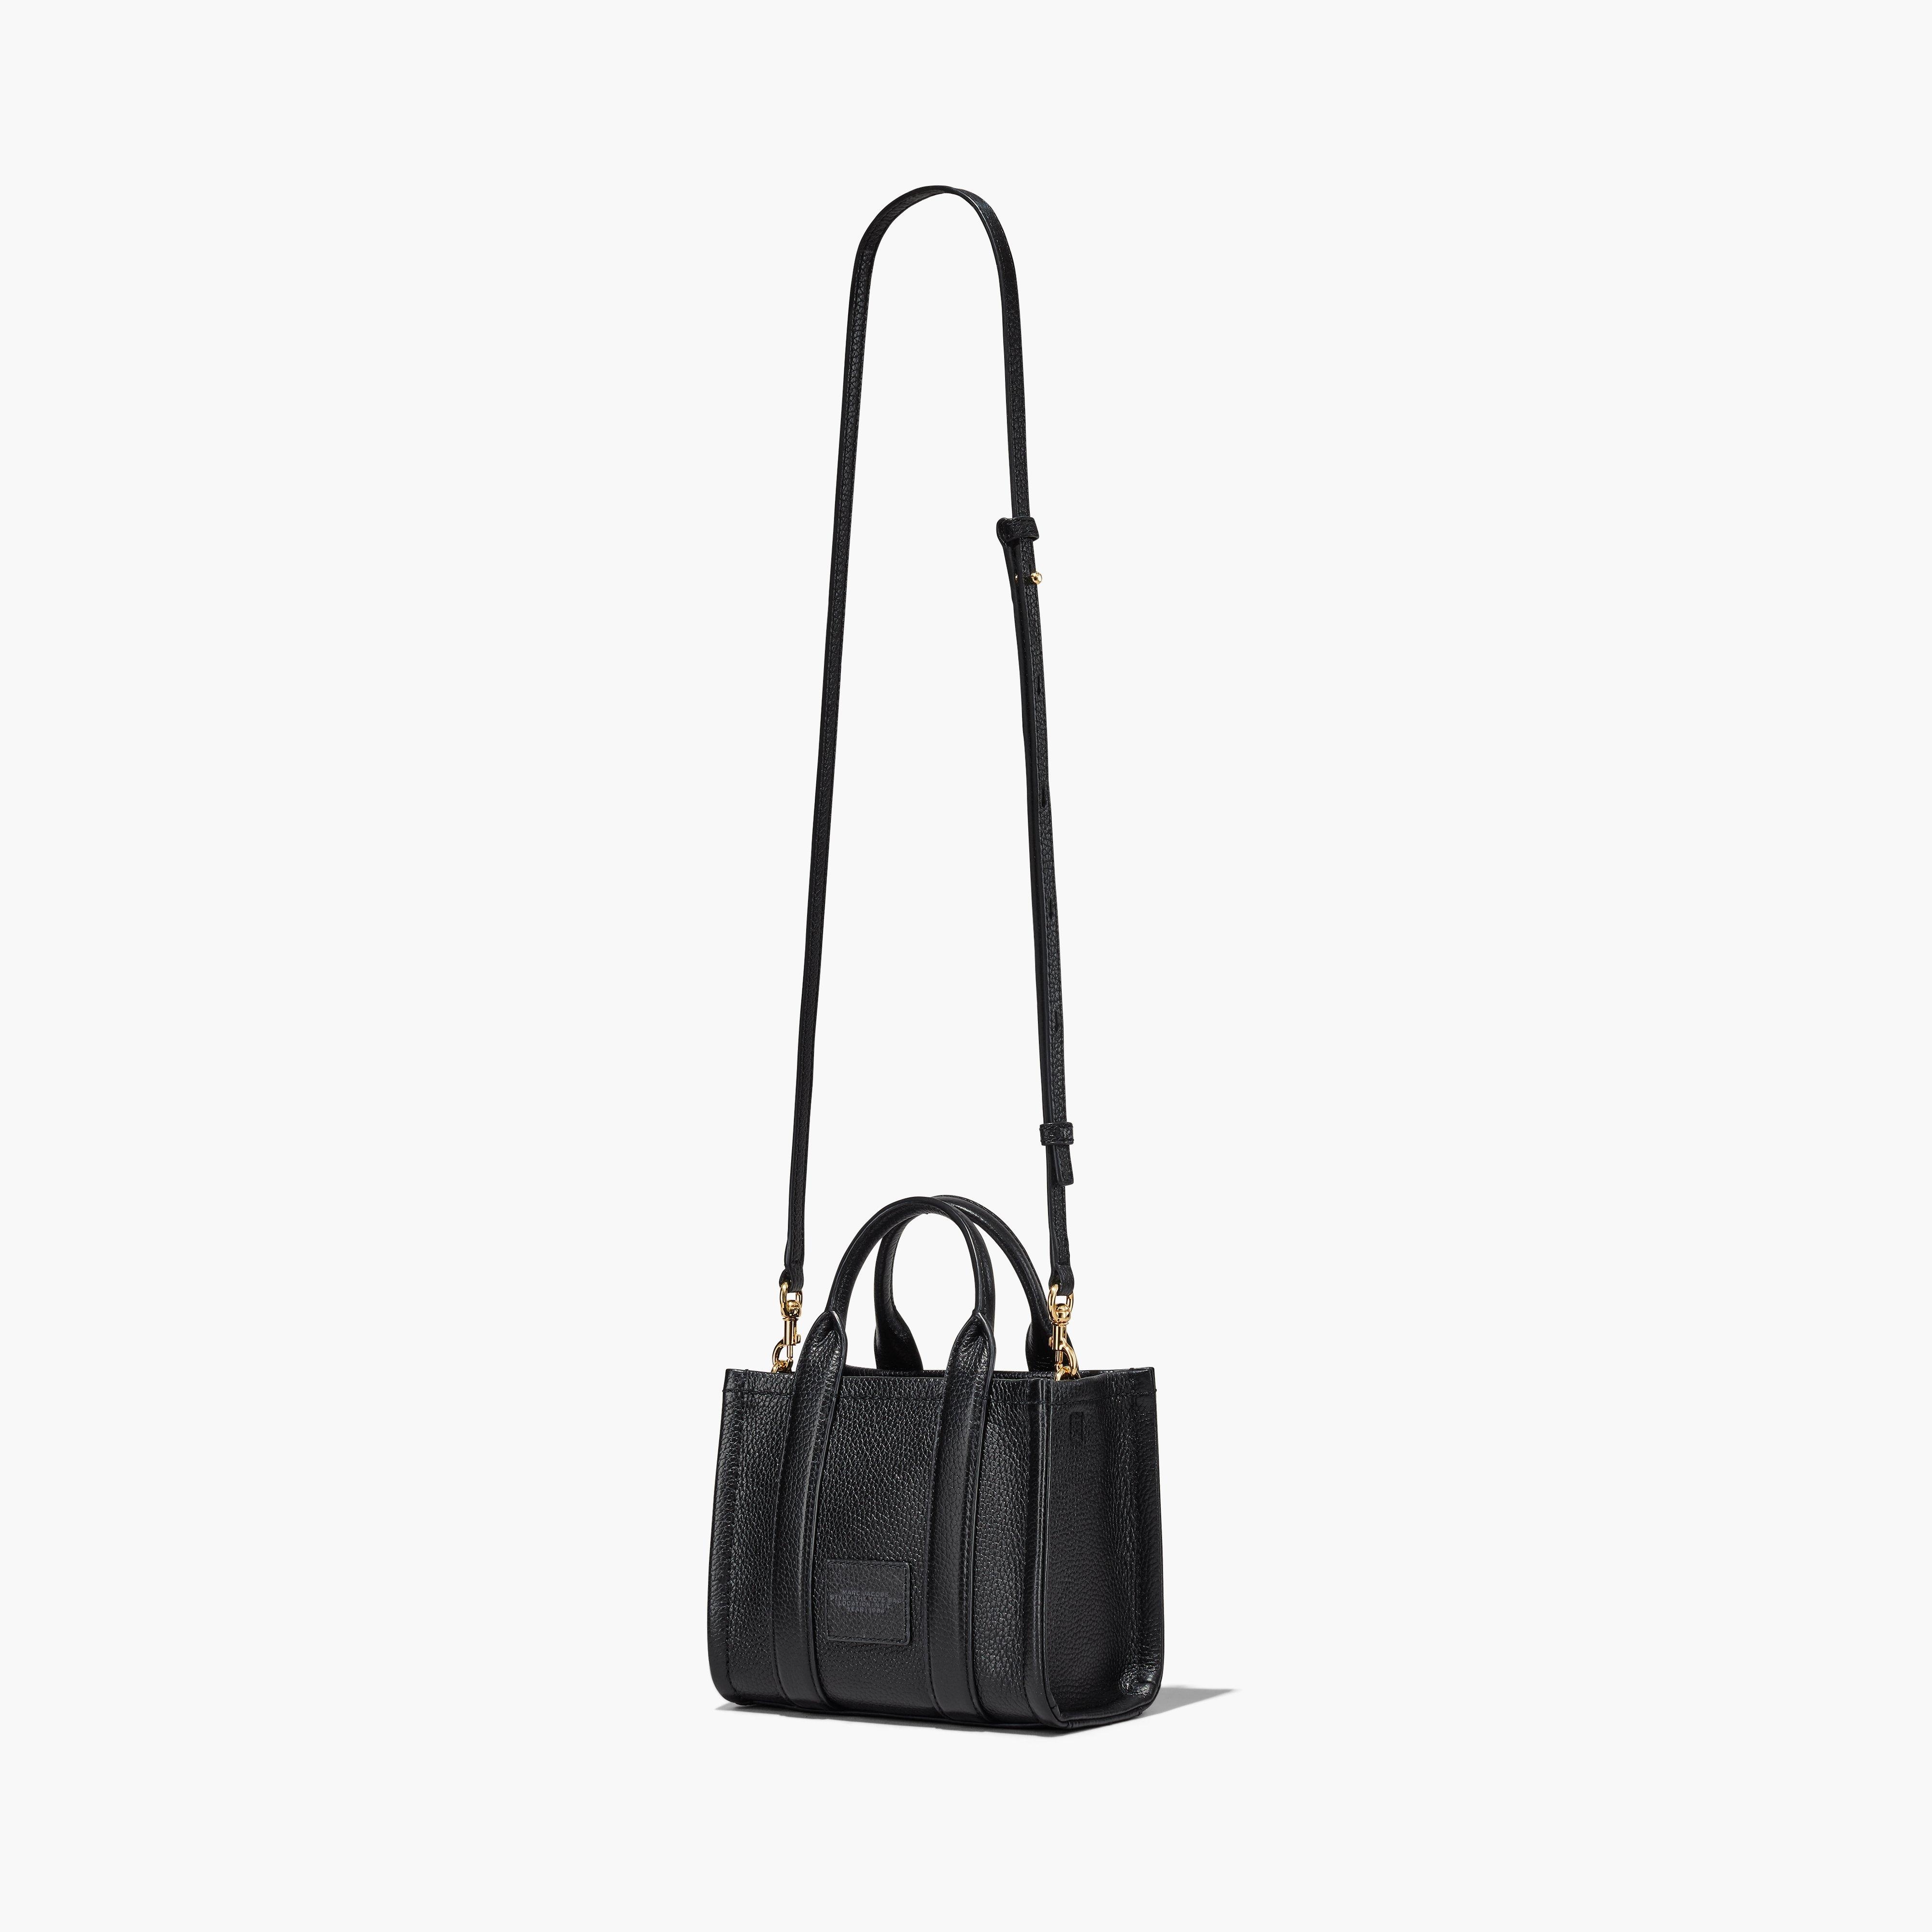 THE LEATHER MICRO TOTE BAG - 3